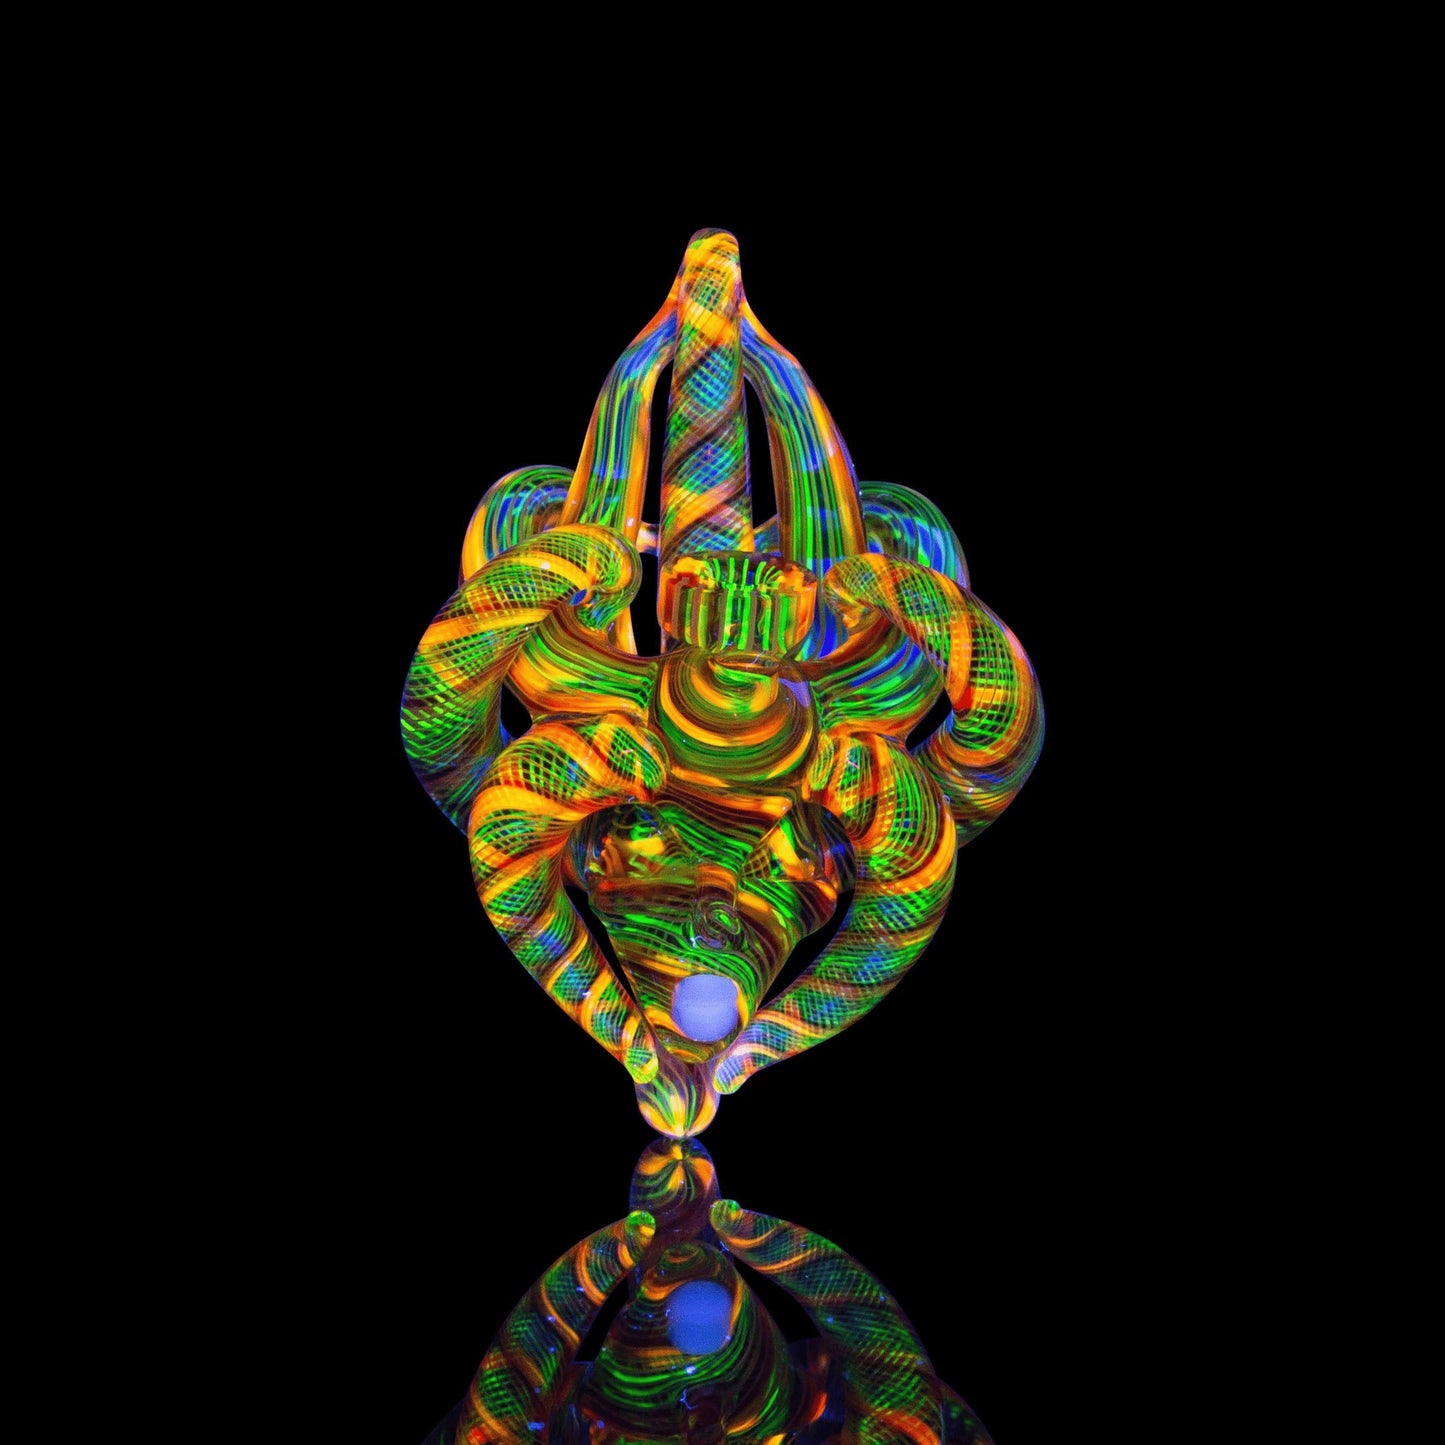 artisan-crafted glass pendant - Collab Goddess Pendant by LaceFace x Karma Glass (Rainbow Equinox 2022)